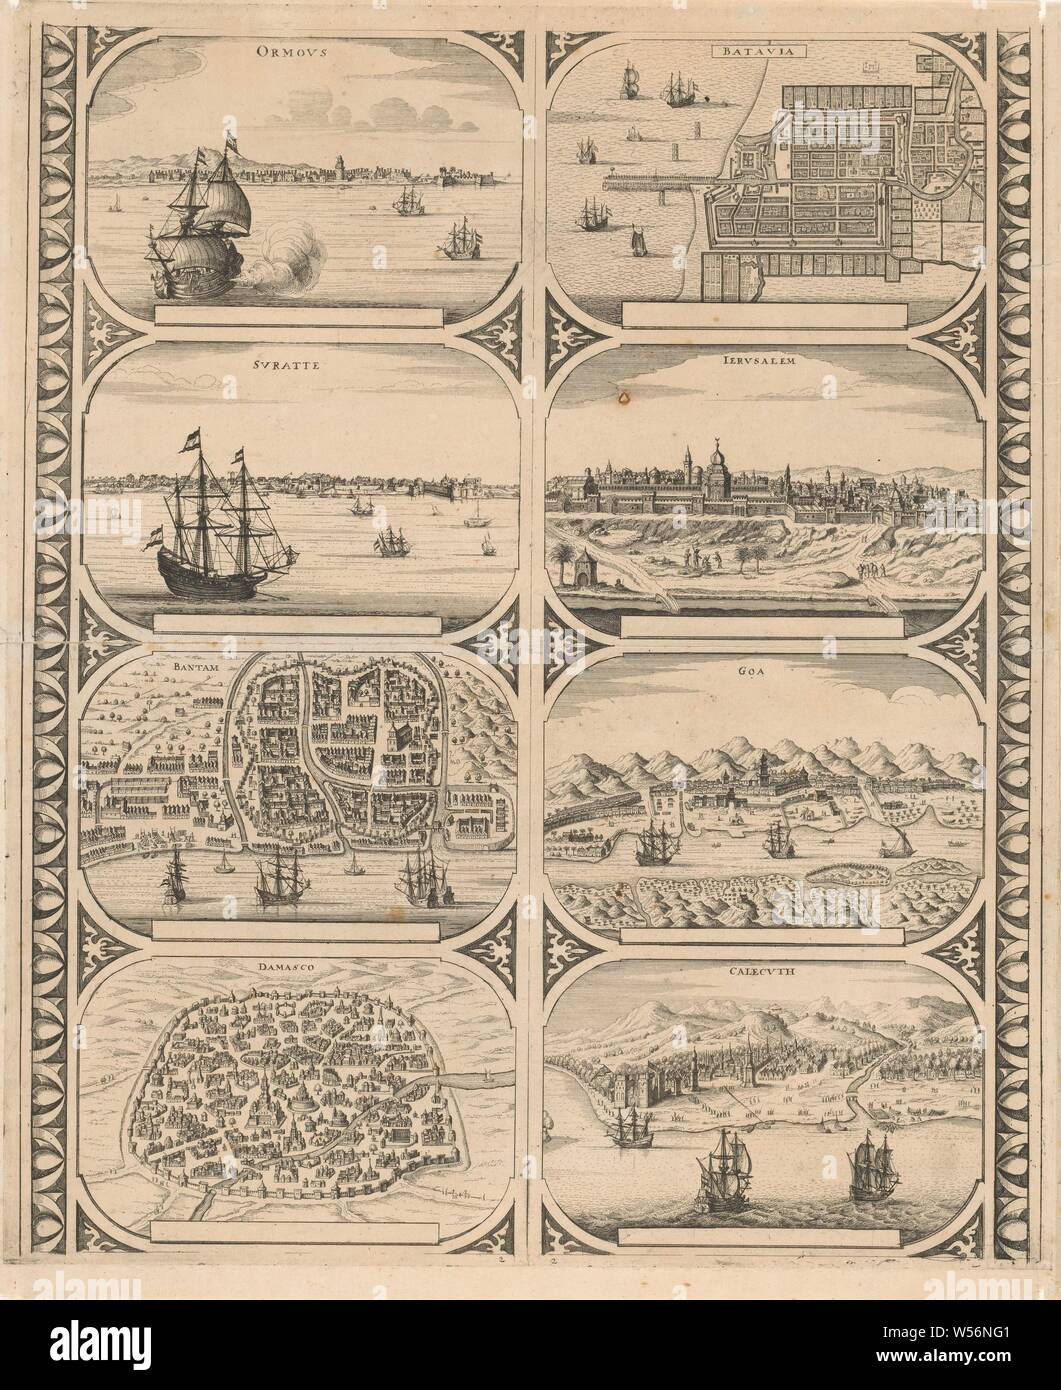 Ormovs / Svrattte / Bantam / Damasco / Batavia / Iervsalem / Goa / Calecvth (title on object), Sheet with two vertical strips each with four views of the cities in Asia: Hormoz, Suratte, Bantam, Damascus, Batavia, Jerusalem, Goa and Calcutta. Uncut leaf with eight peripheral figures intended to be glued into strips as a frame around a map of a continent, maps of cities, prospect of city, town panorama, silhouette of city, Hormoz, Jazireh-ye, Goa, Calcutta, anonymous, Amsterdam, 1670 - 1672, paper, etching, h 525 mm × w 437 mm Stock Photo